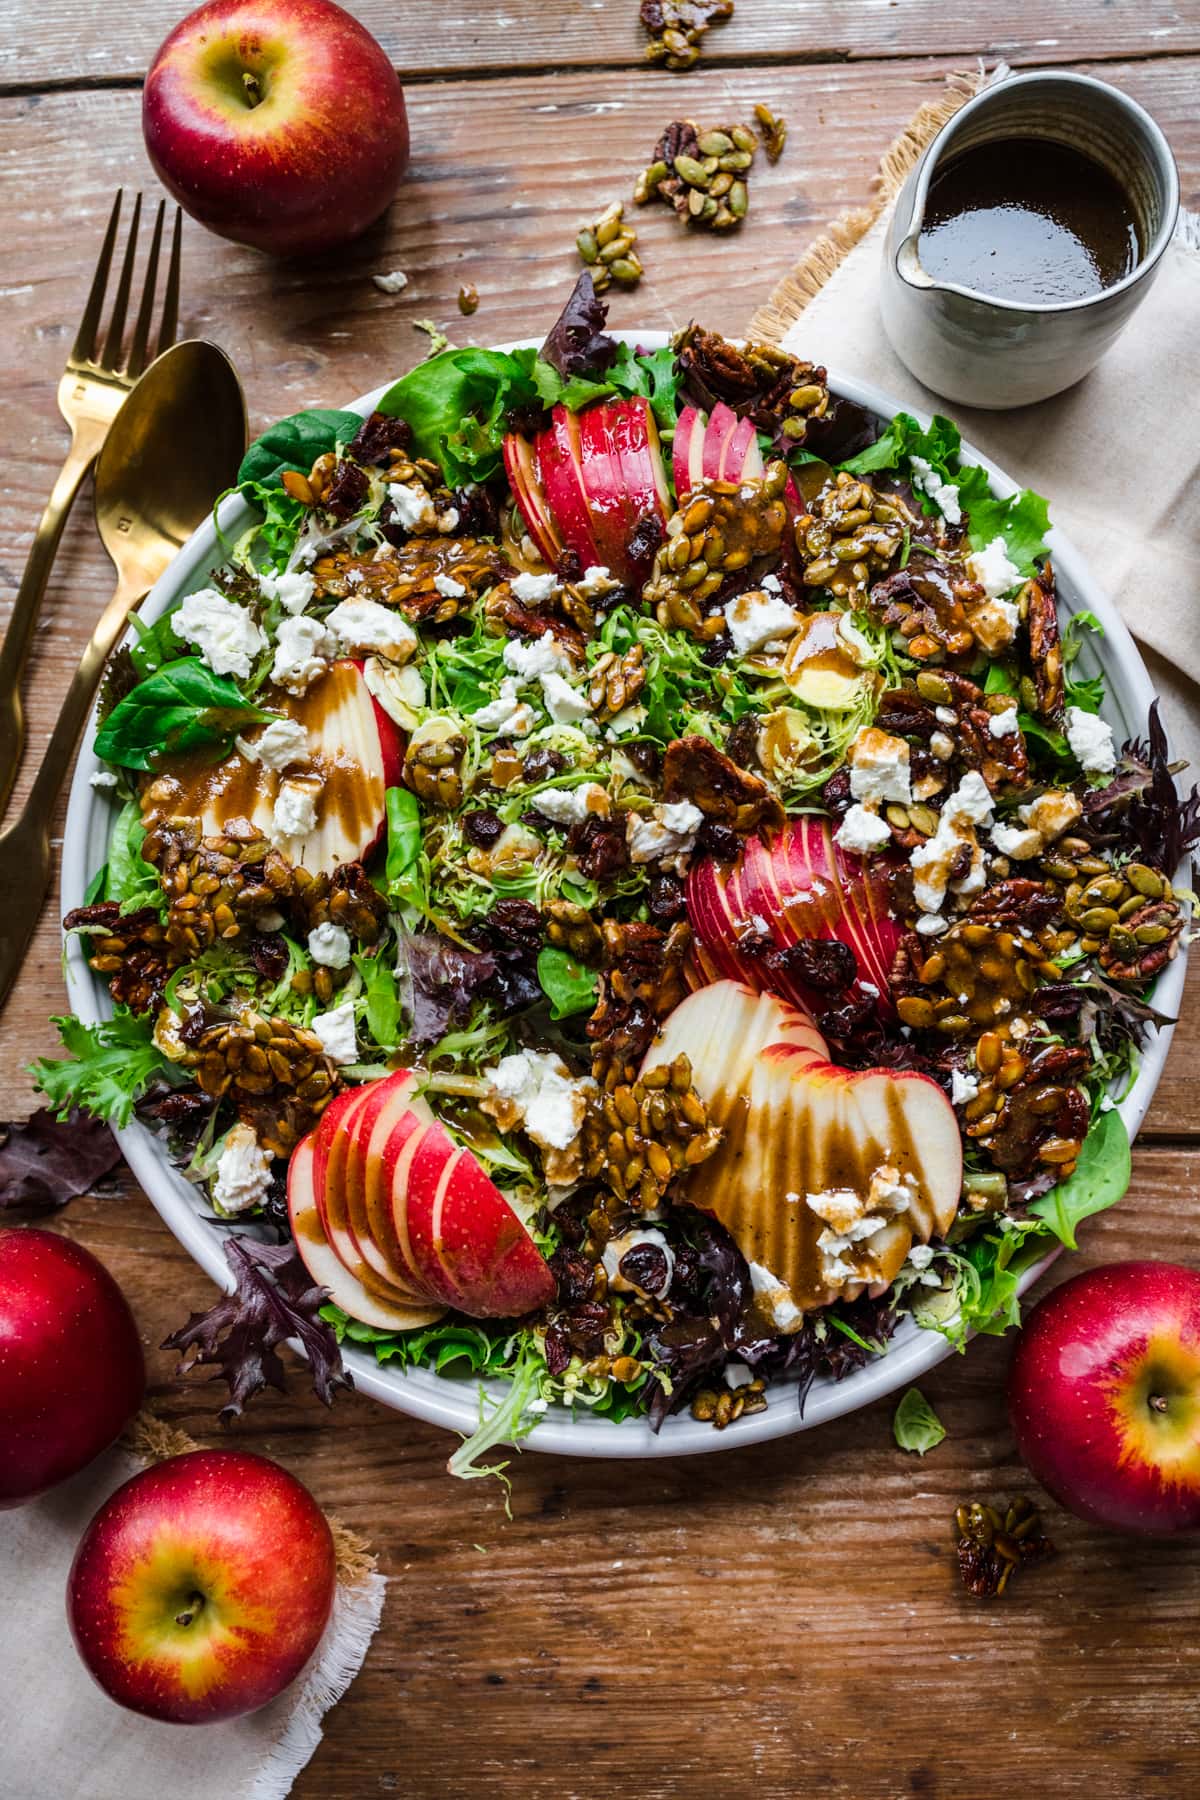 Overhead view of apple salad with dressing drizzled over the top.